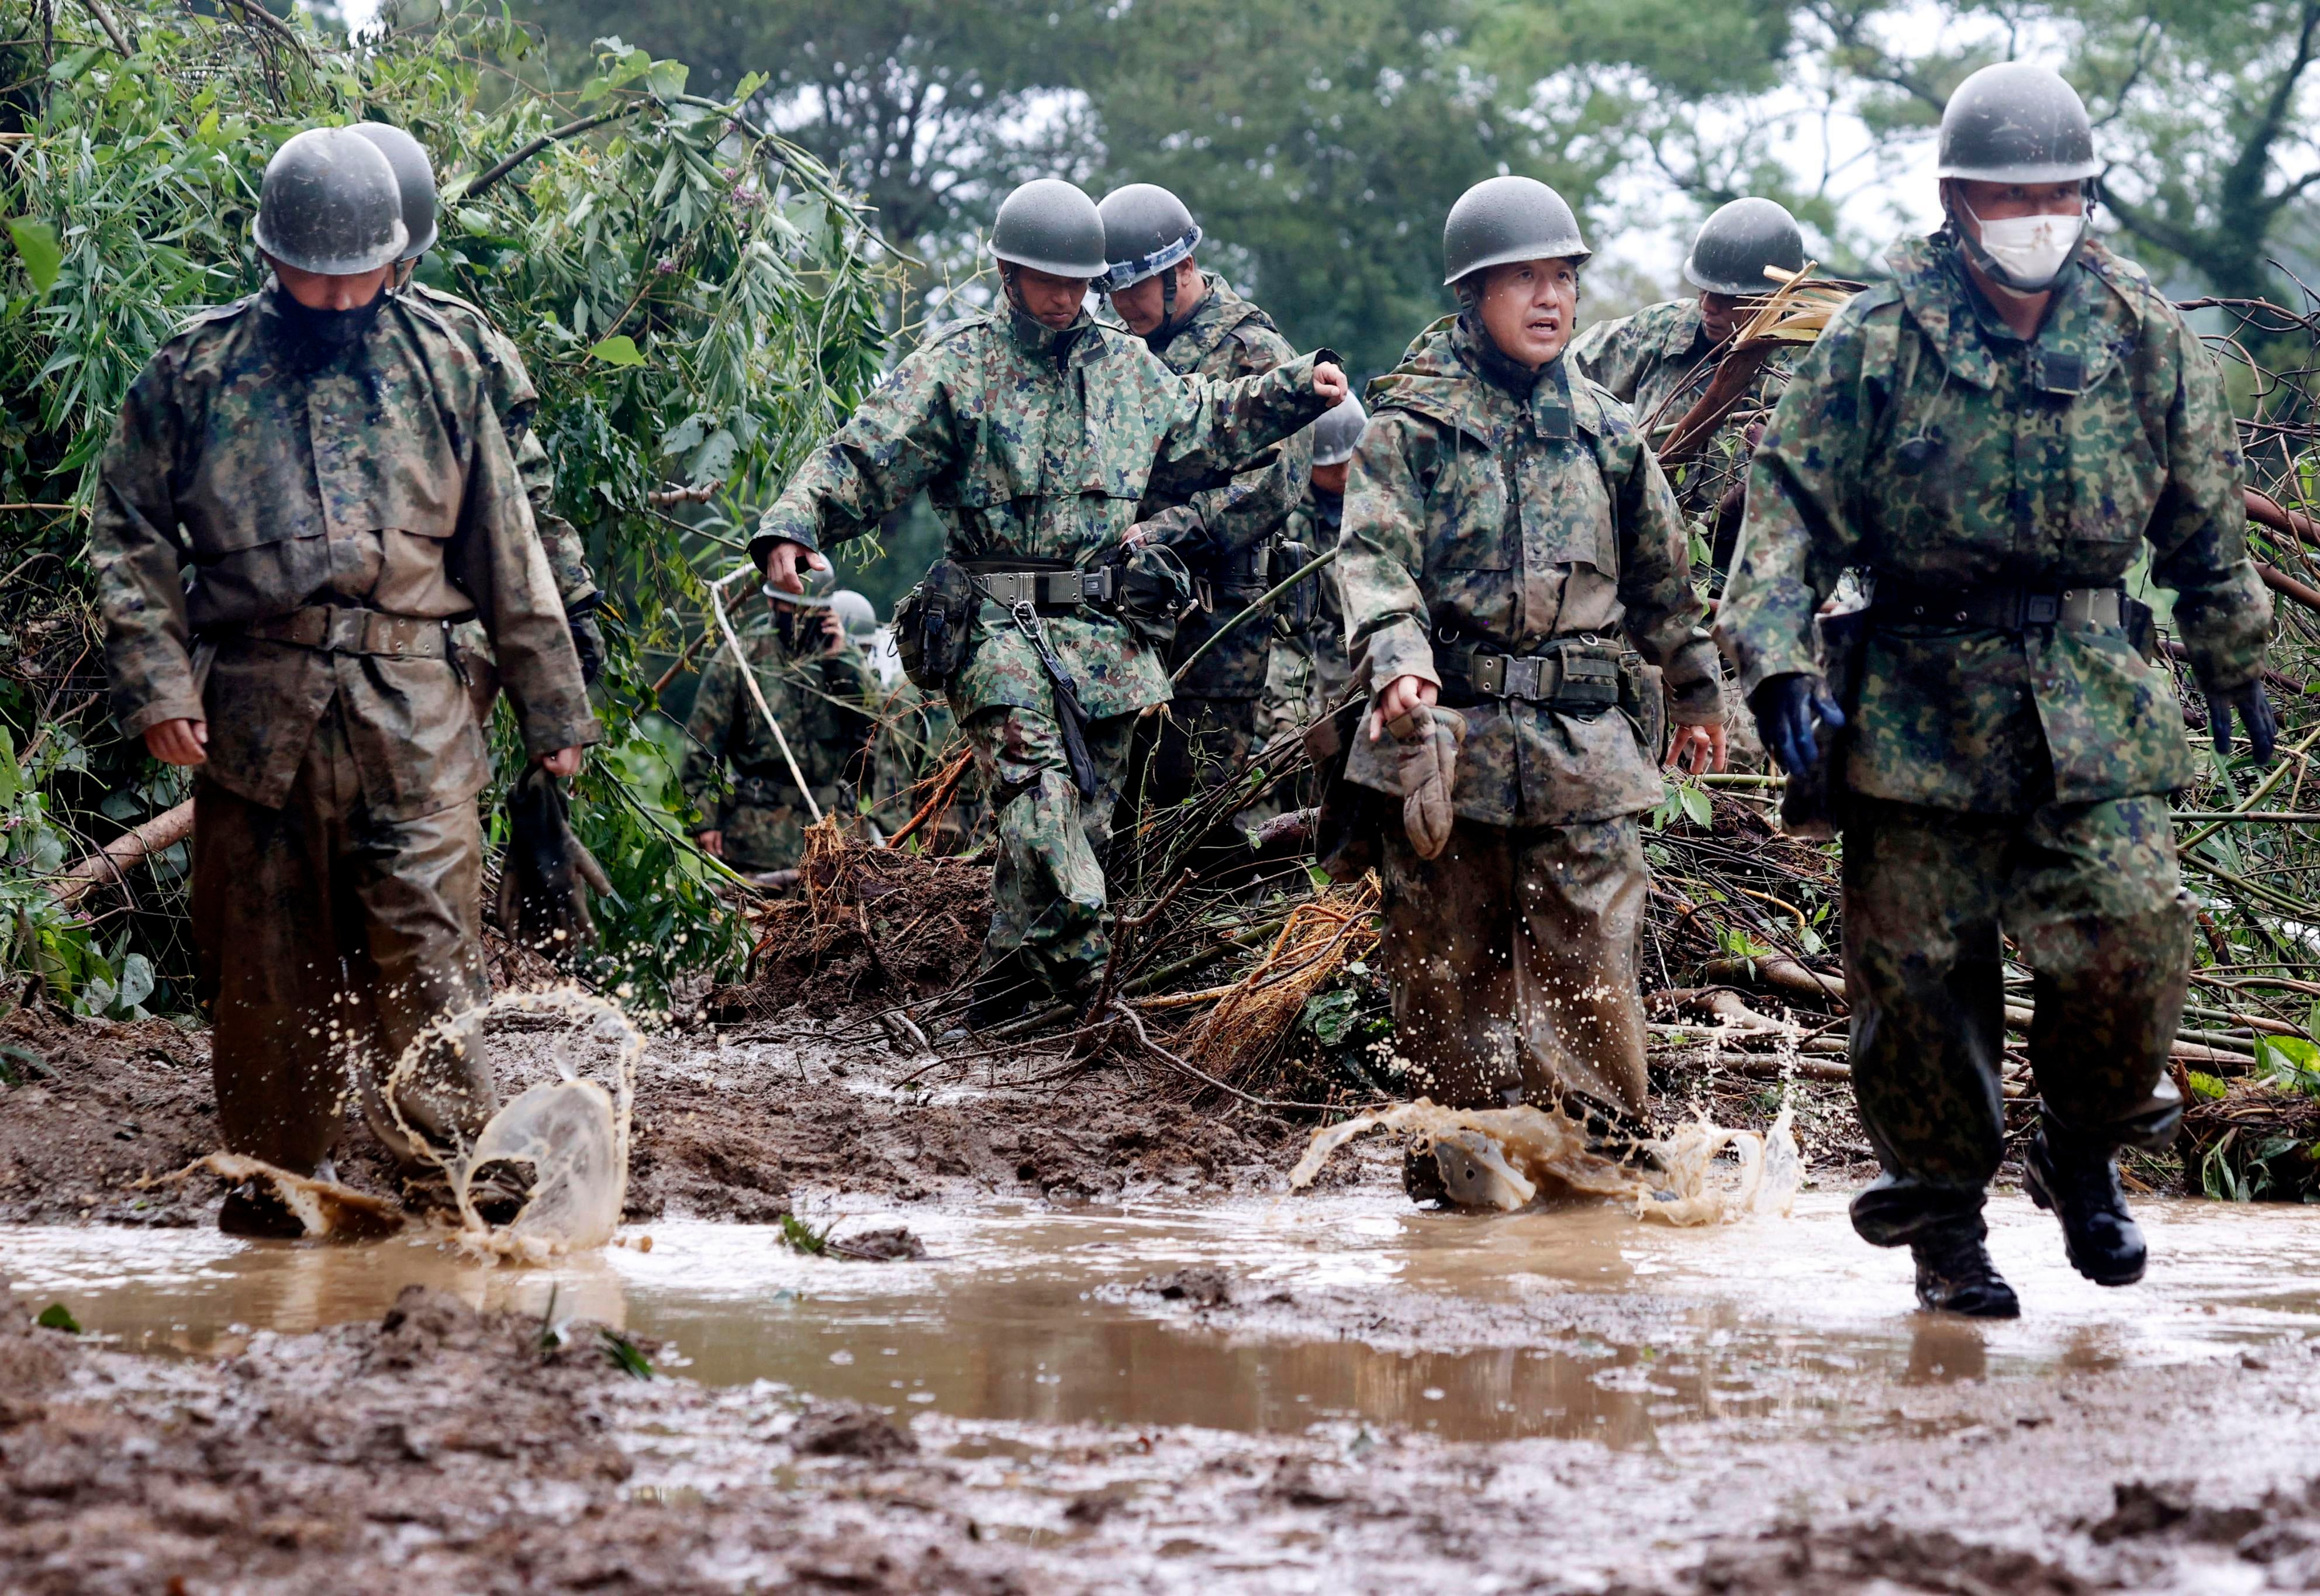 Japanese forces search for the man missing in a mudslide in Mimata on September 19. (Photo: Kyodo, AP)